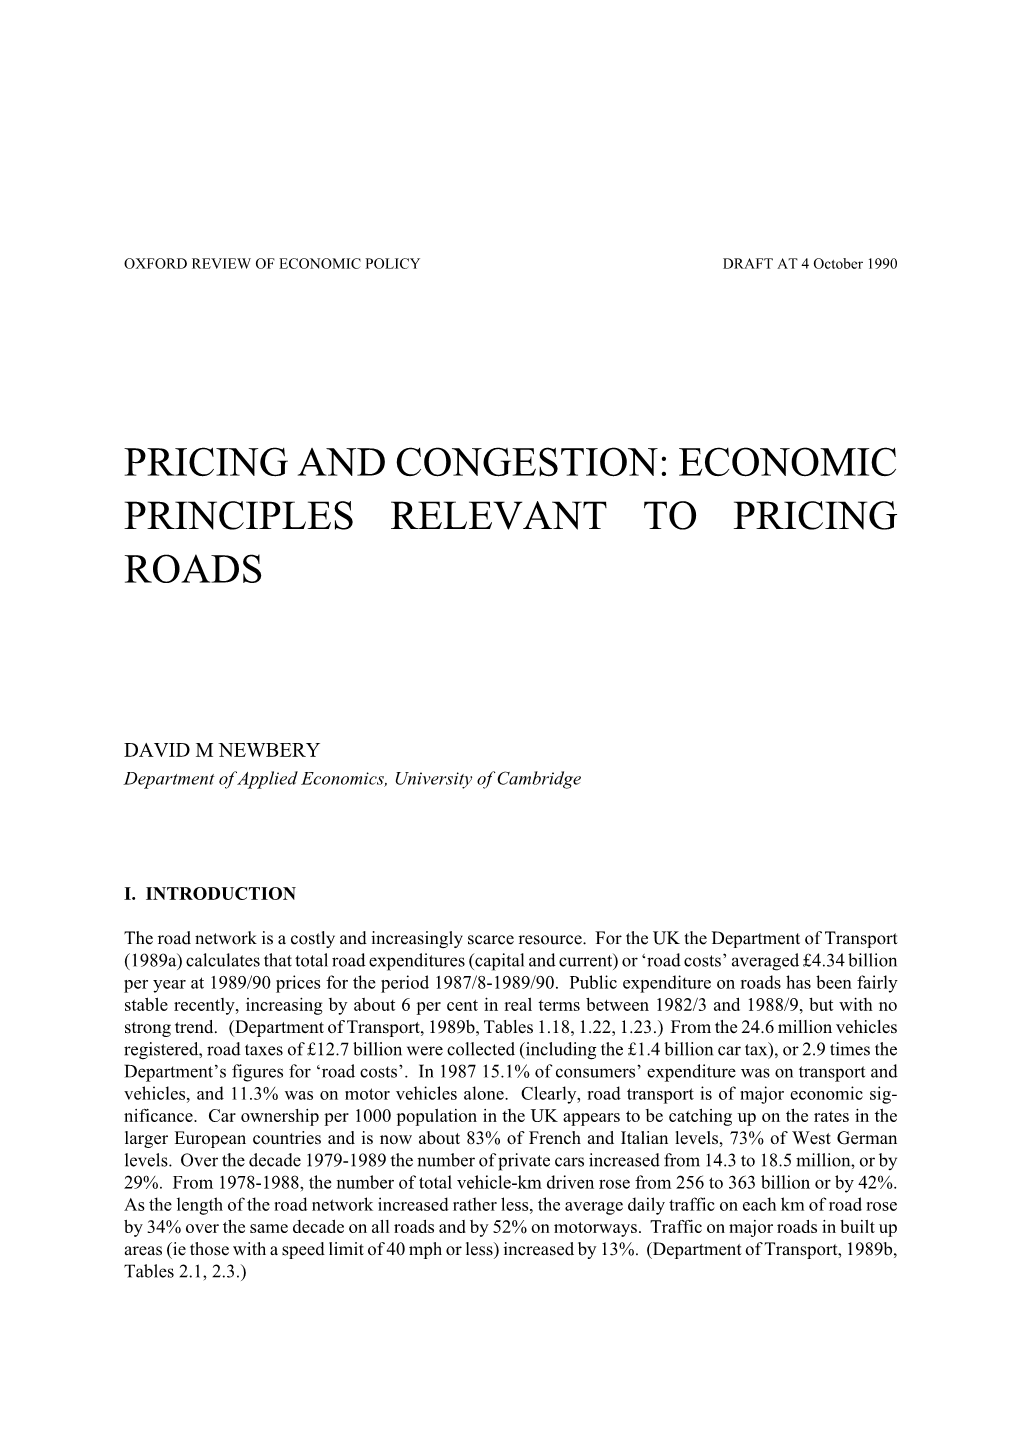 Pricing and Congestion: Economic Principles Relevant to Pricing Roads